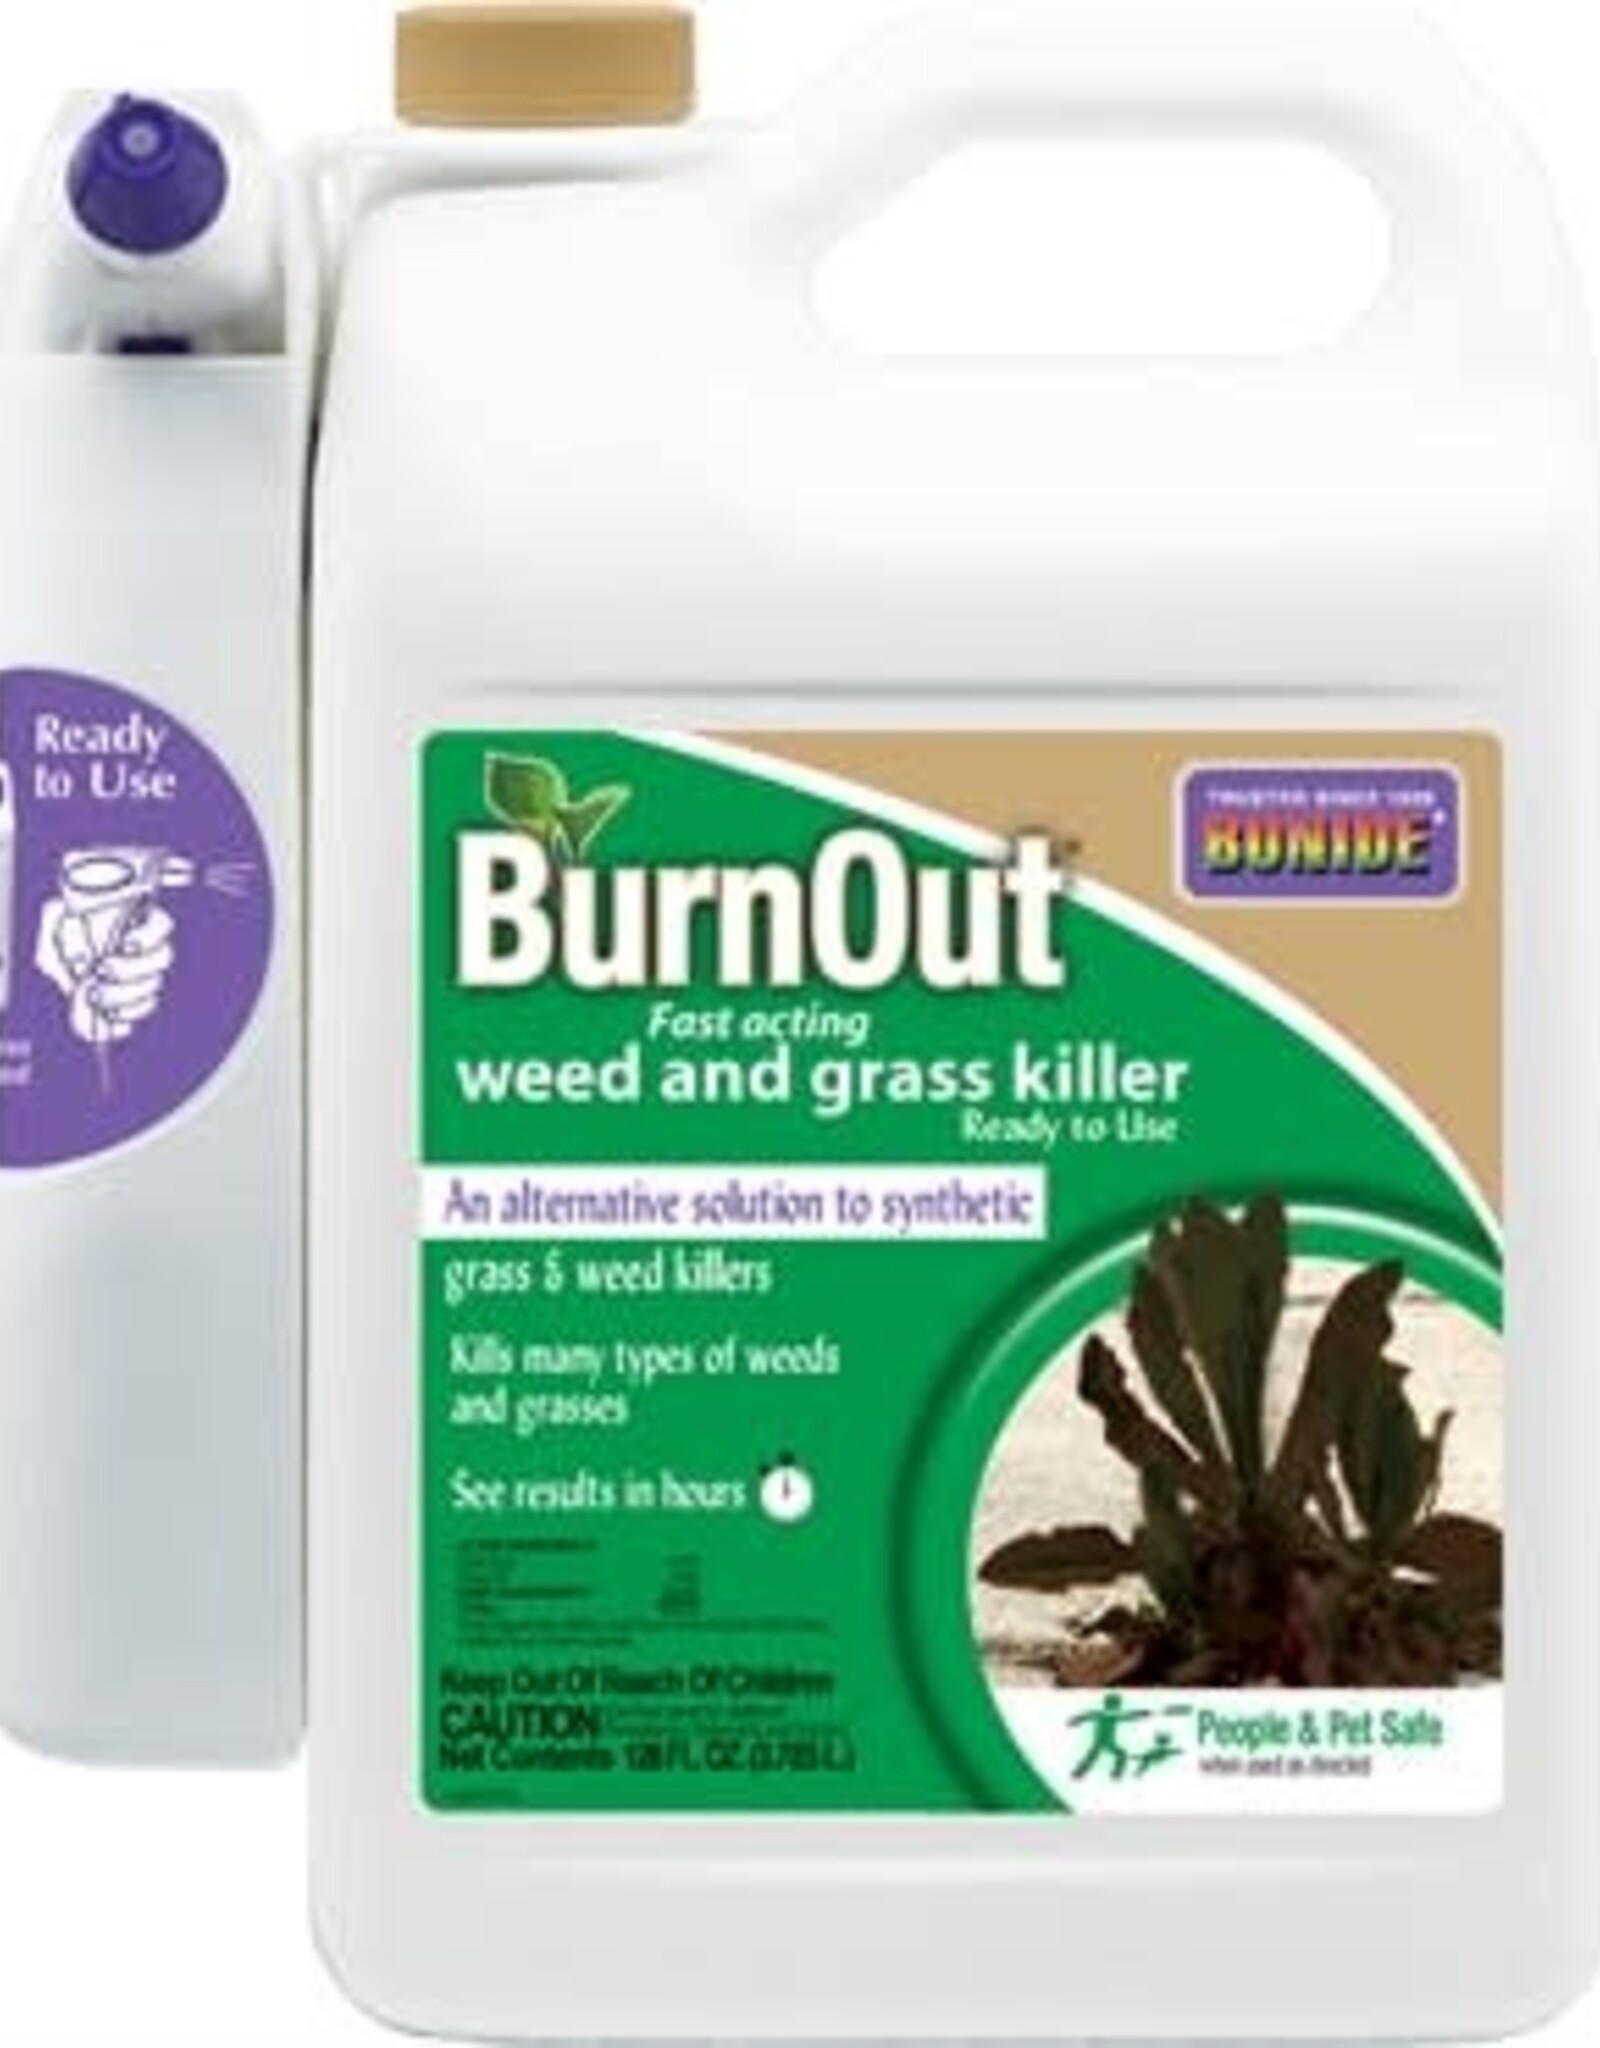 Bonide Burnout Weed & Grass Killer RTS with Power Sprayer